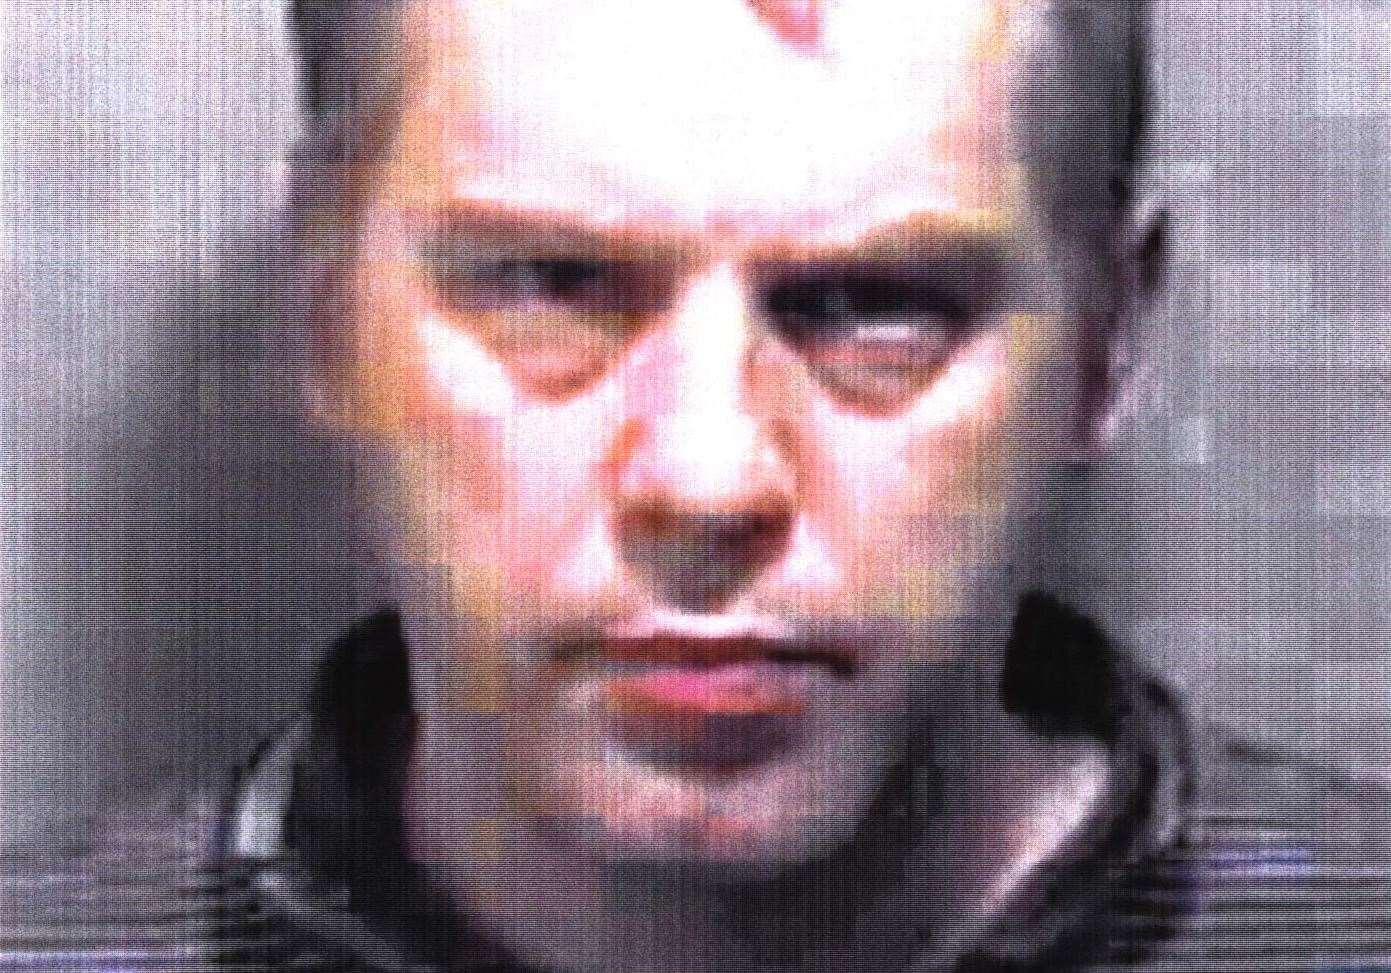 Michael Stone was first convicted in October 1998